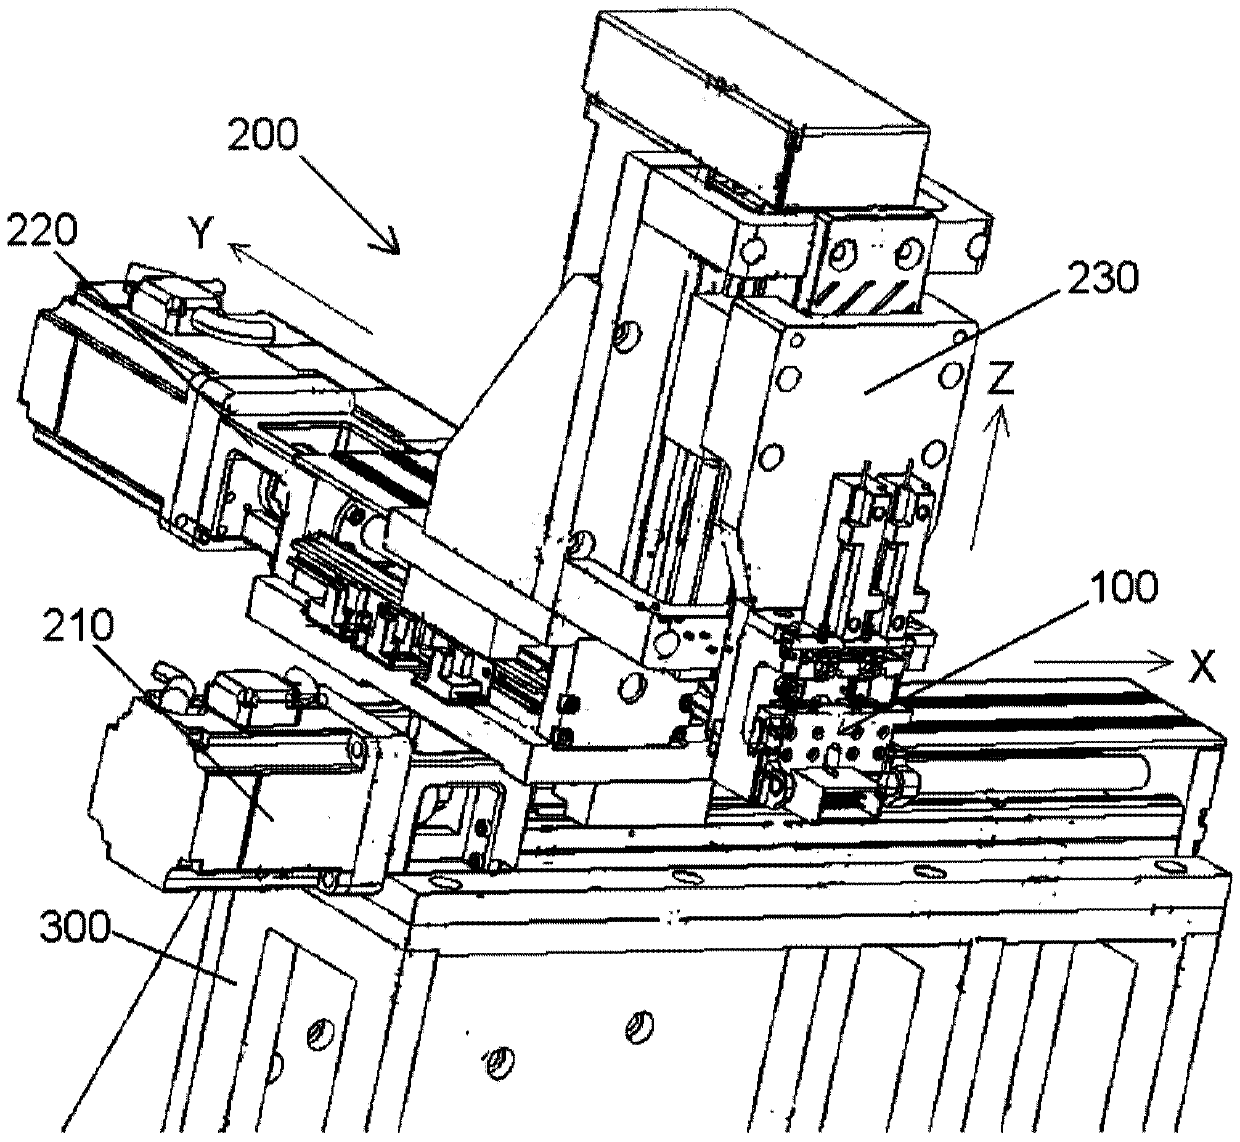 Terminal crimping devices and terminal crimping equipment